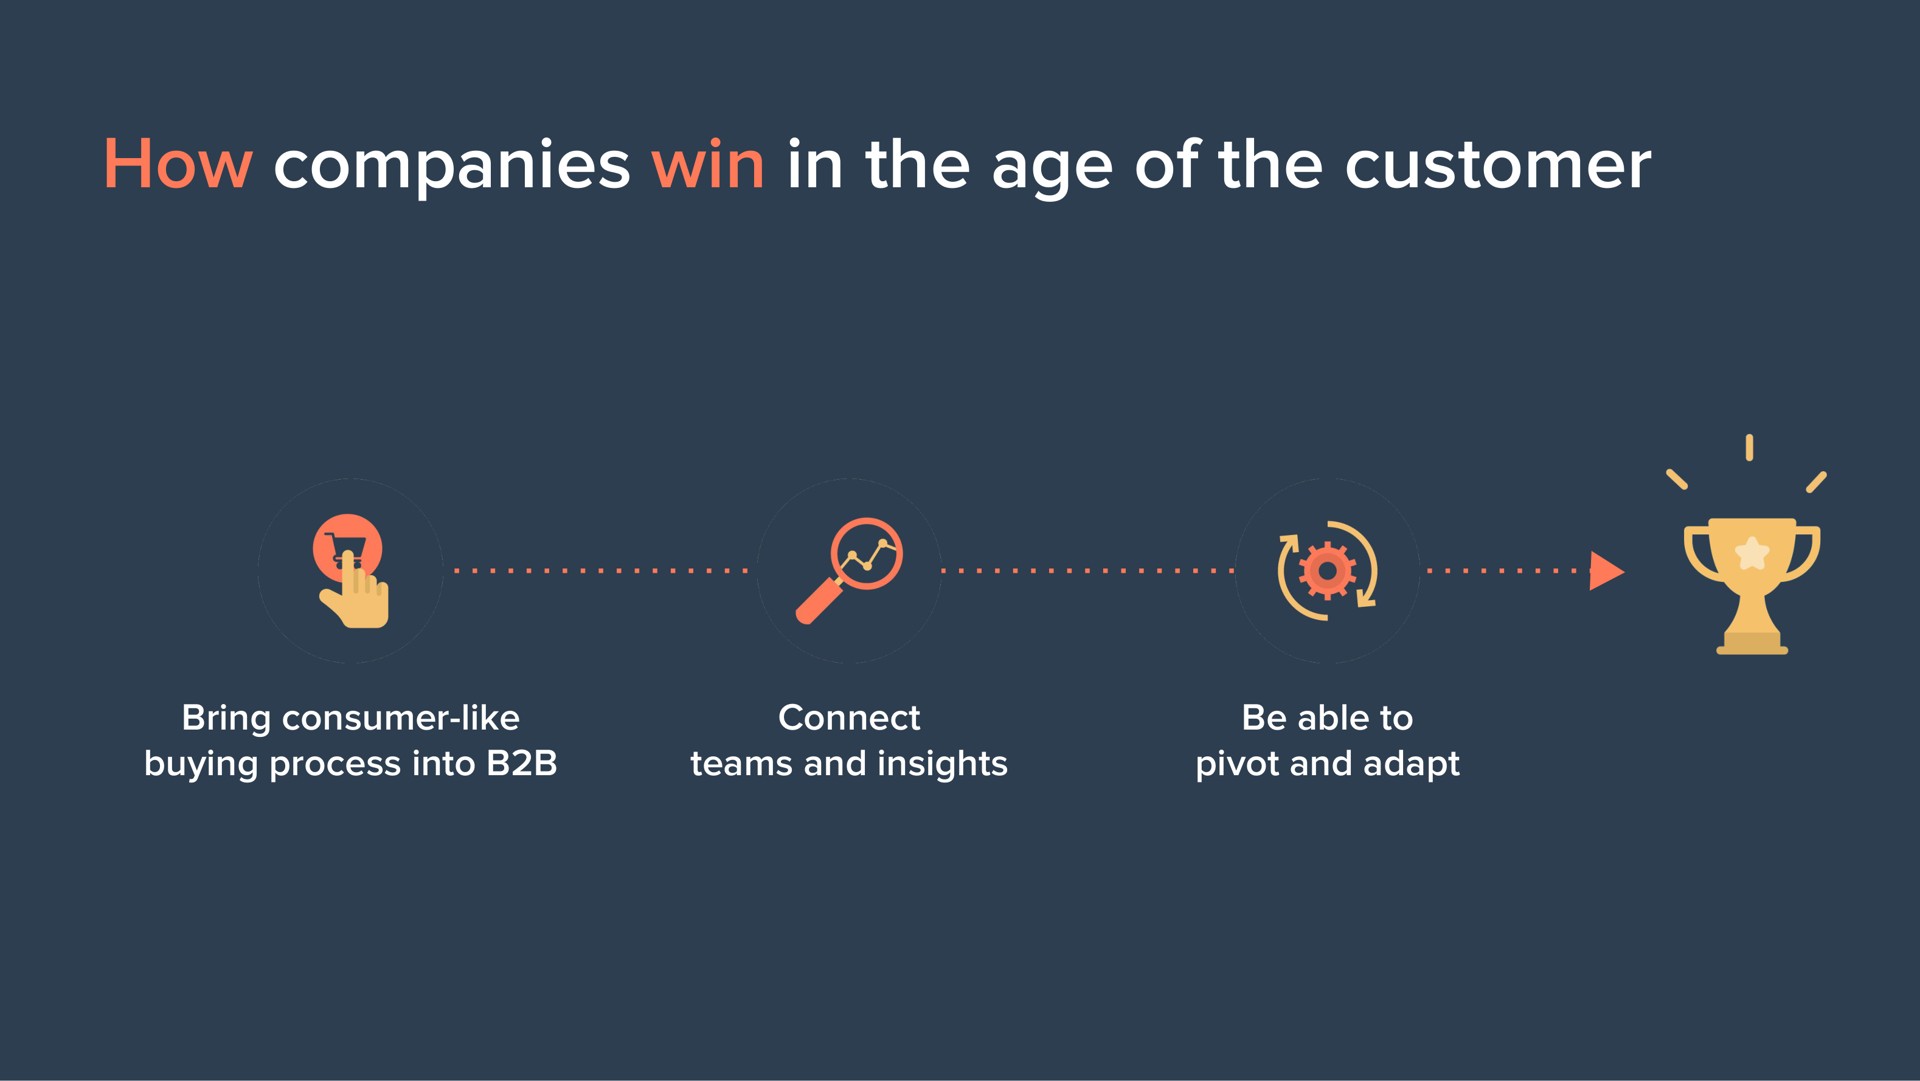 be able to pivot and adapt how companies win in the age of the customer | Hubspot